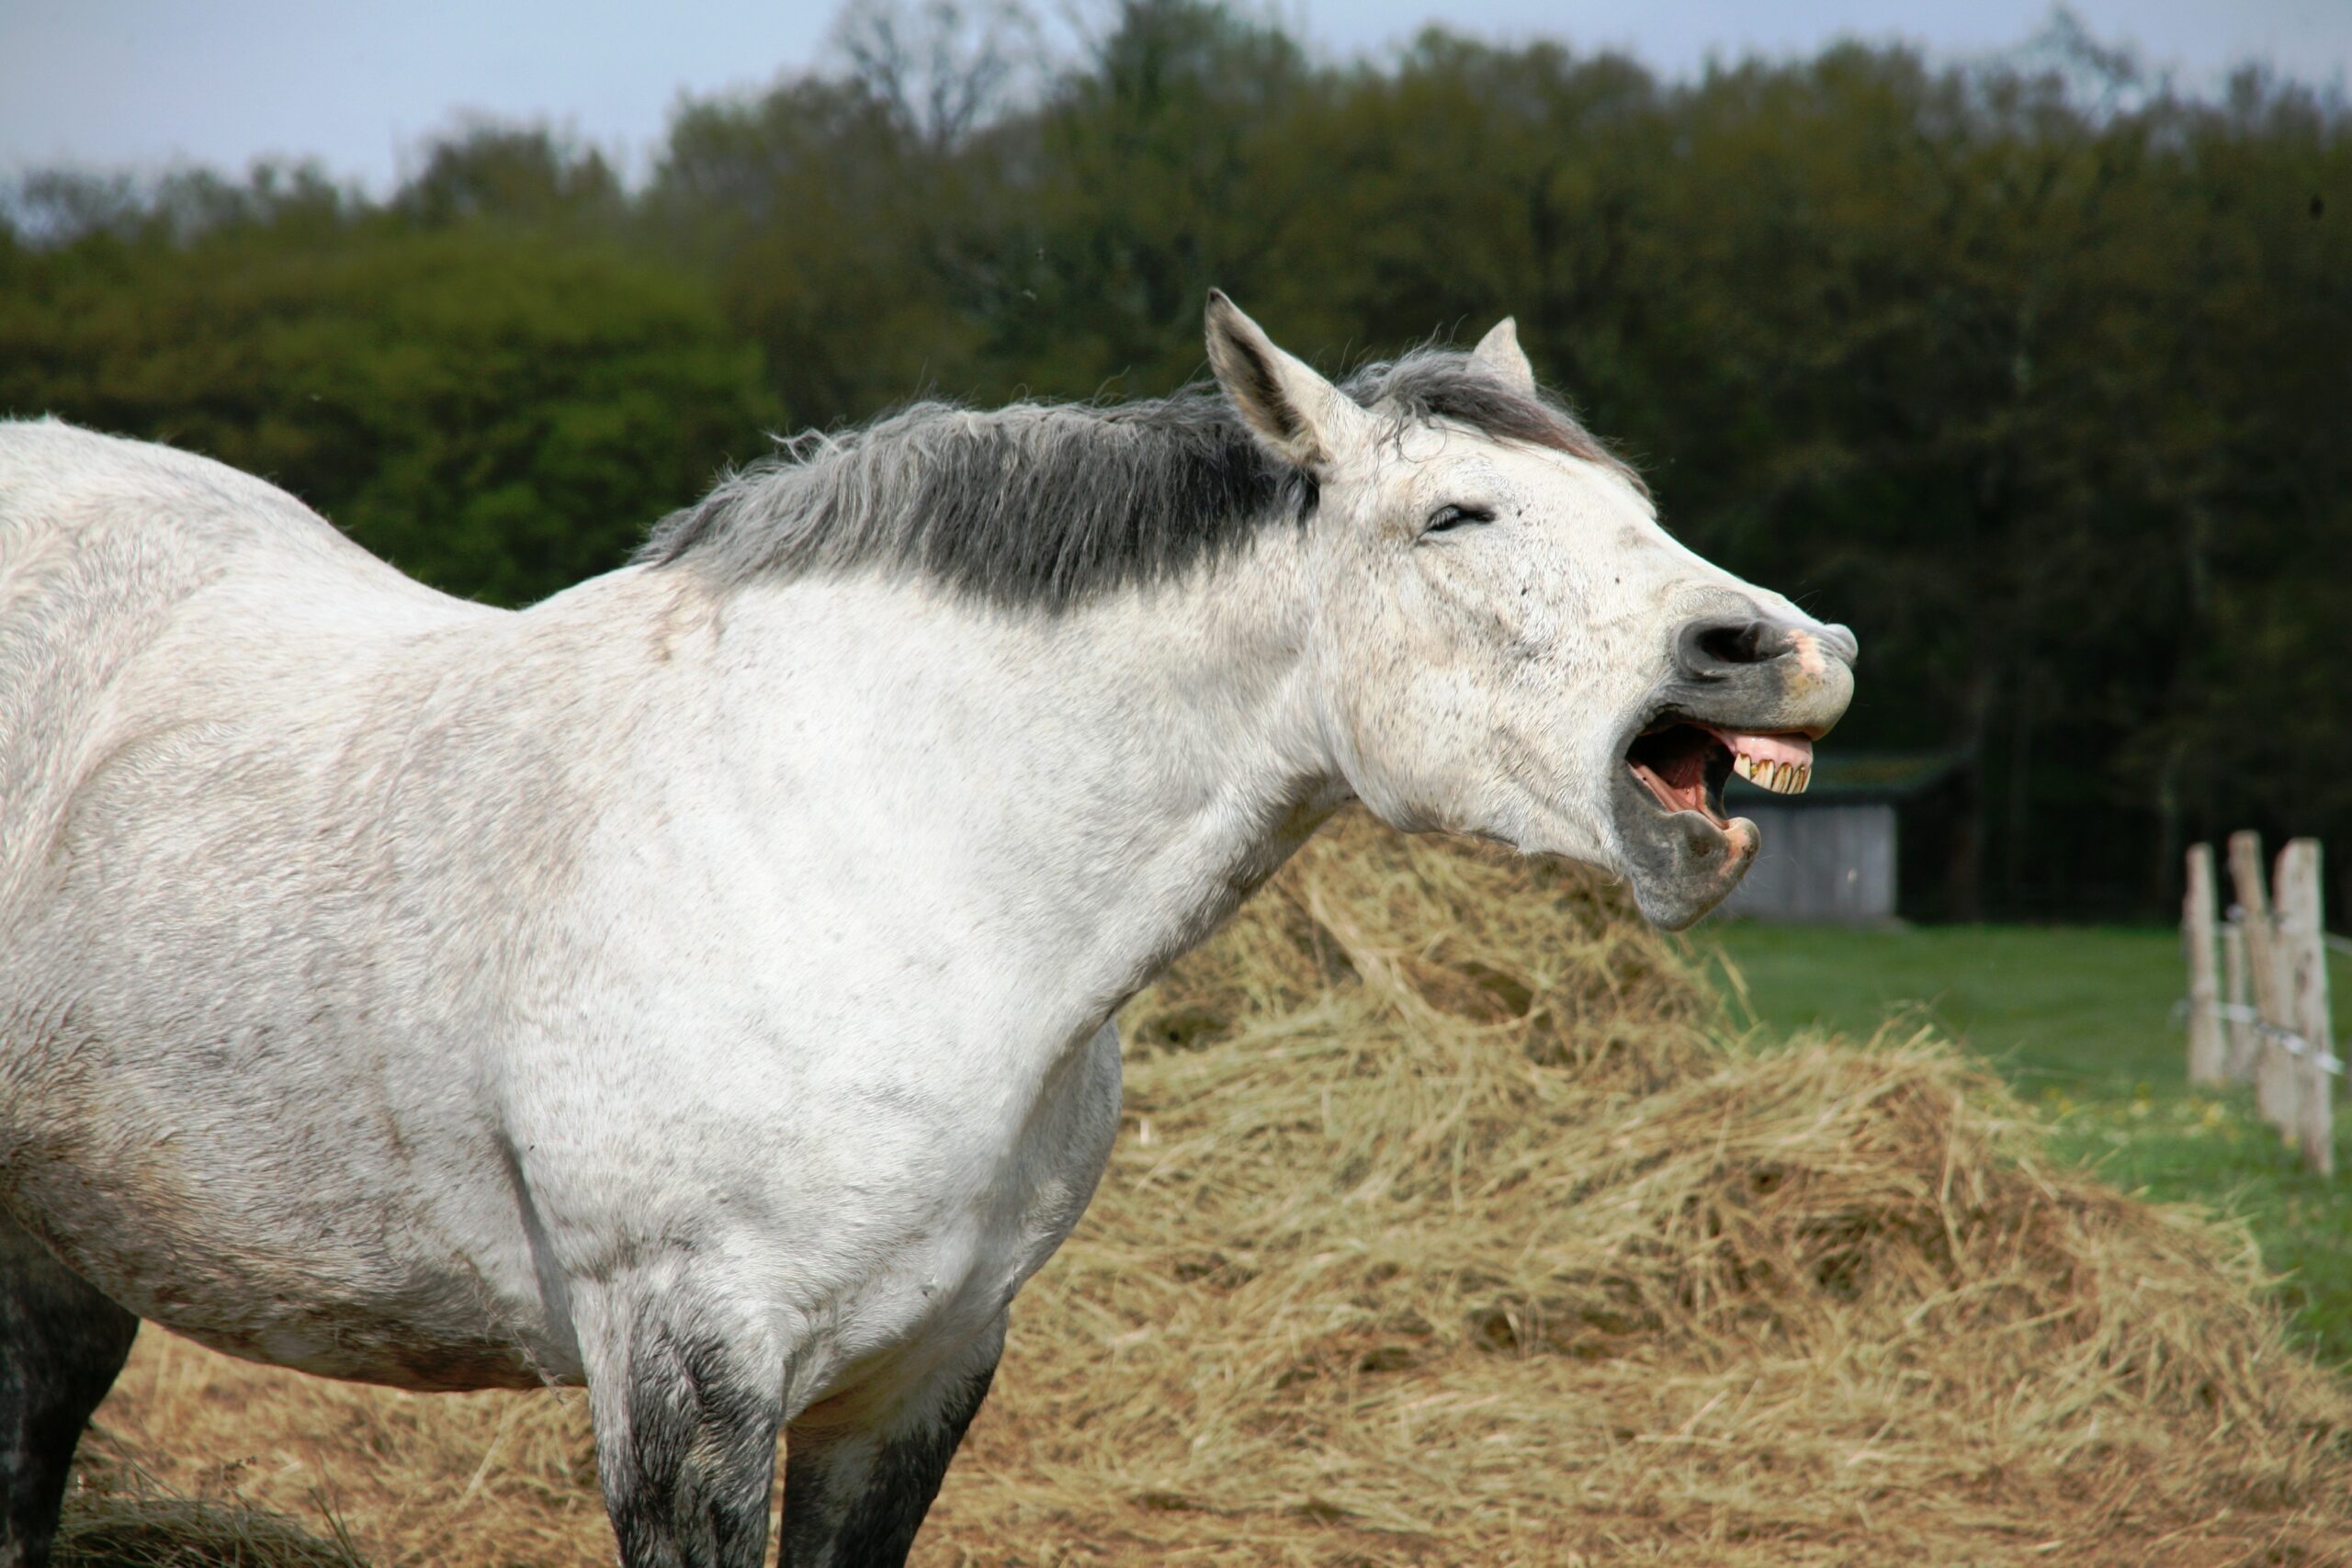 When Do Horses Lose Their Baby Teeth?